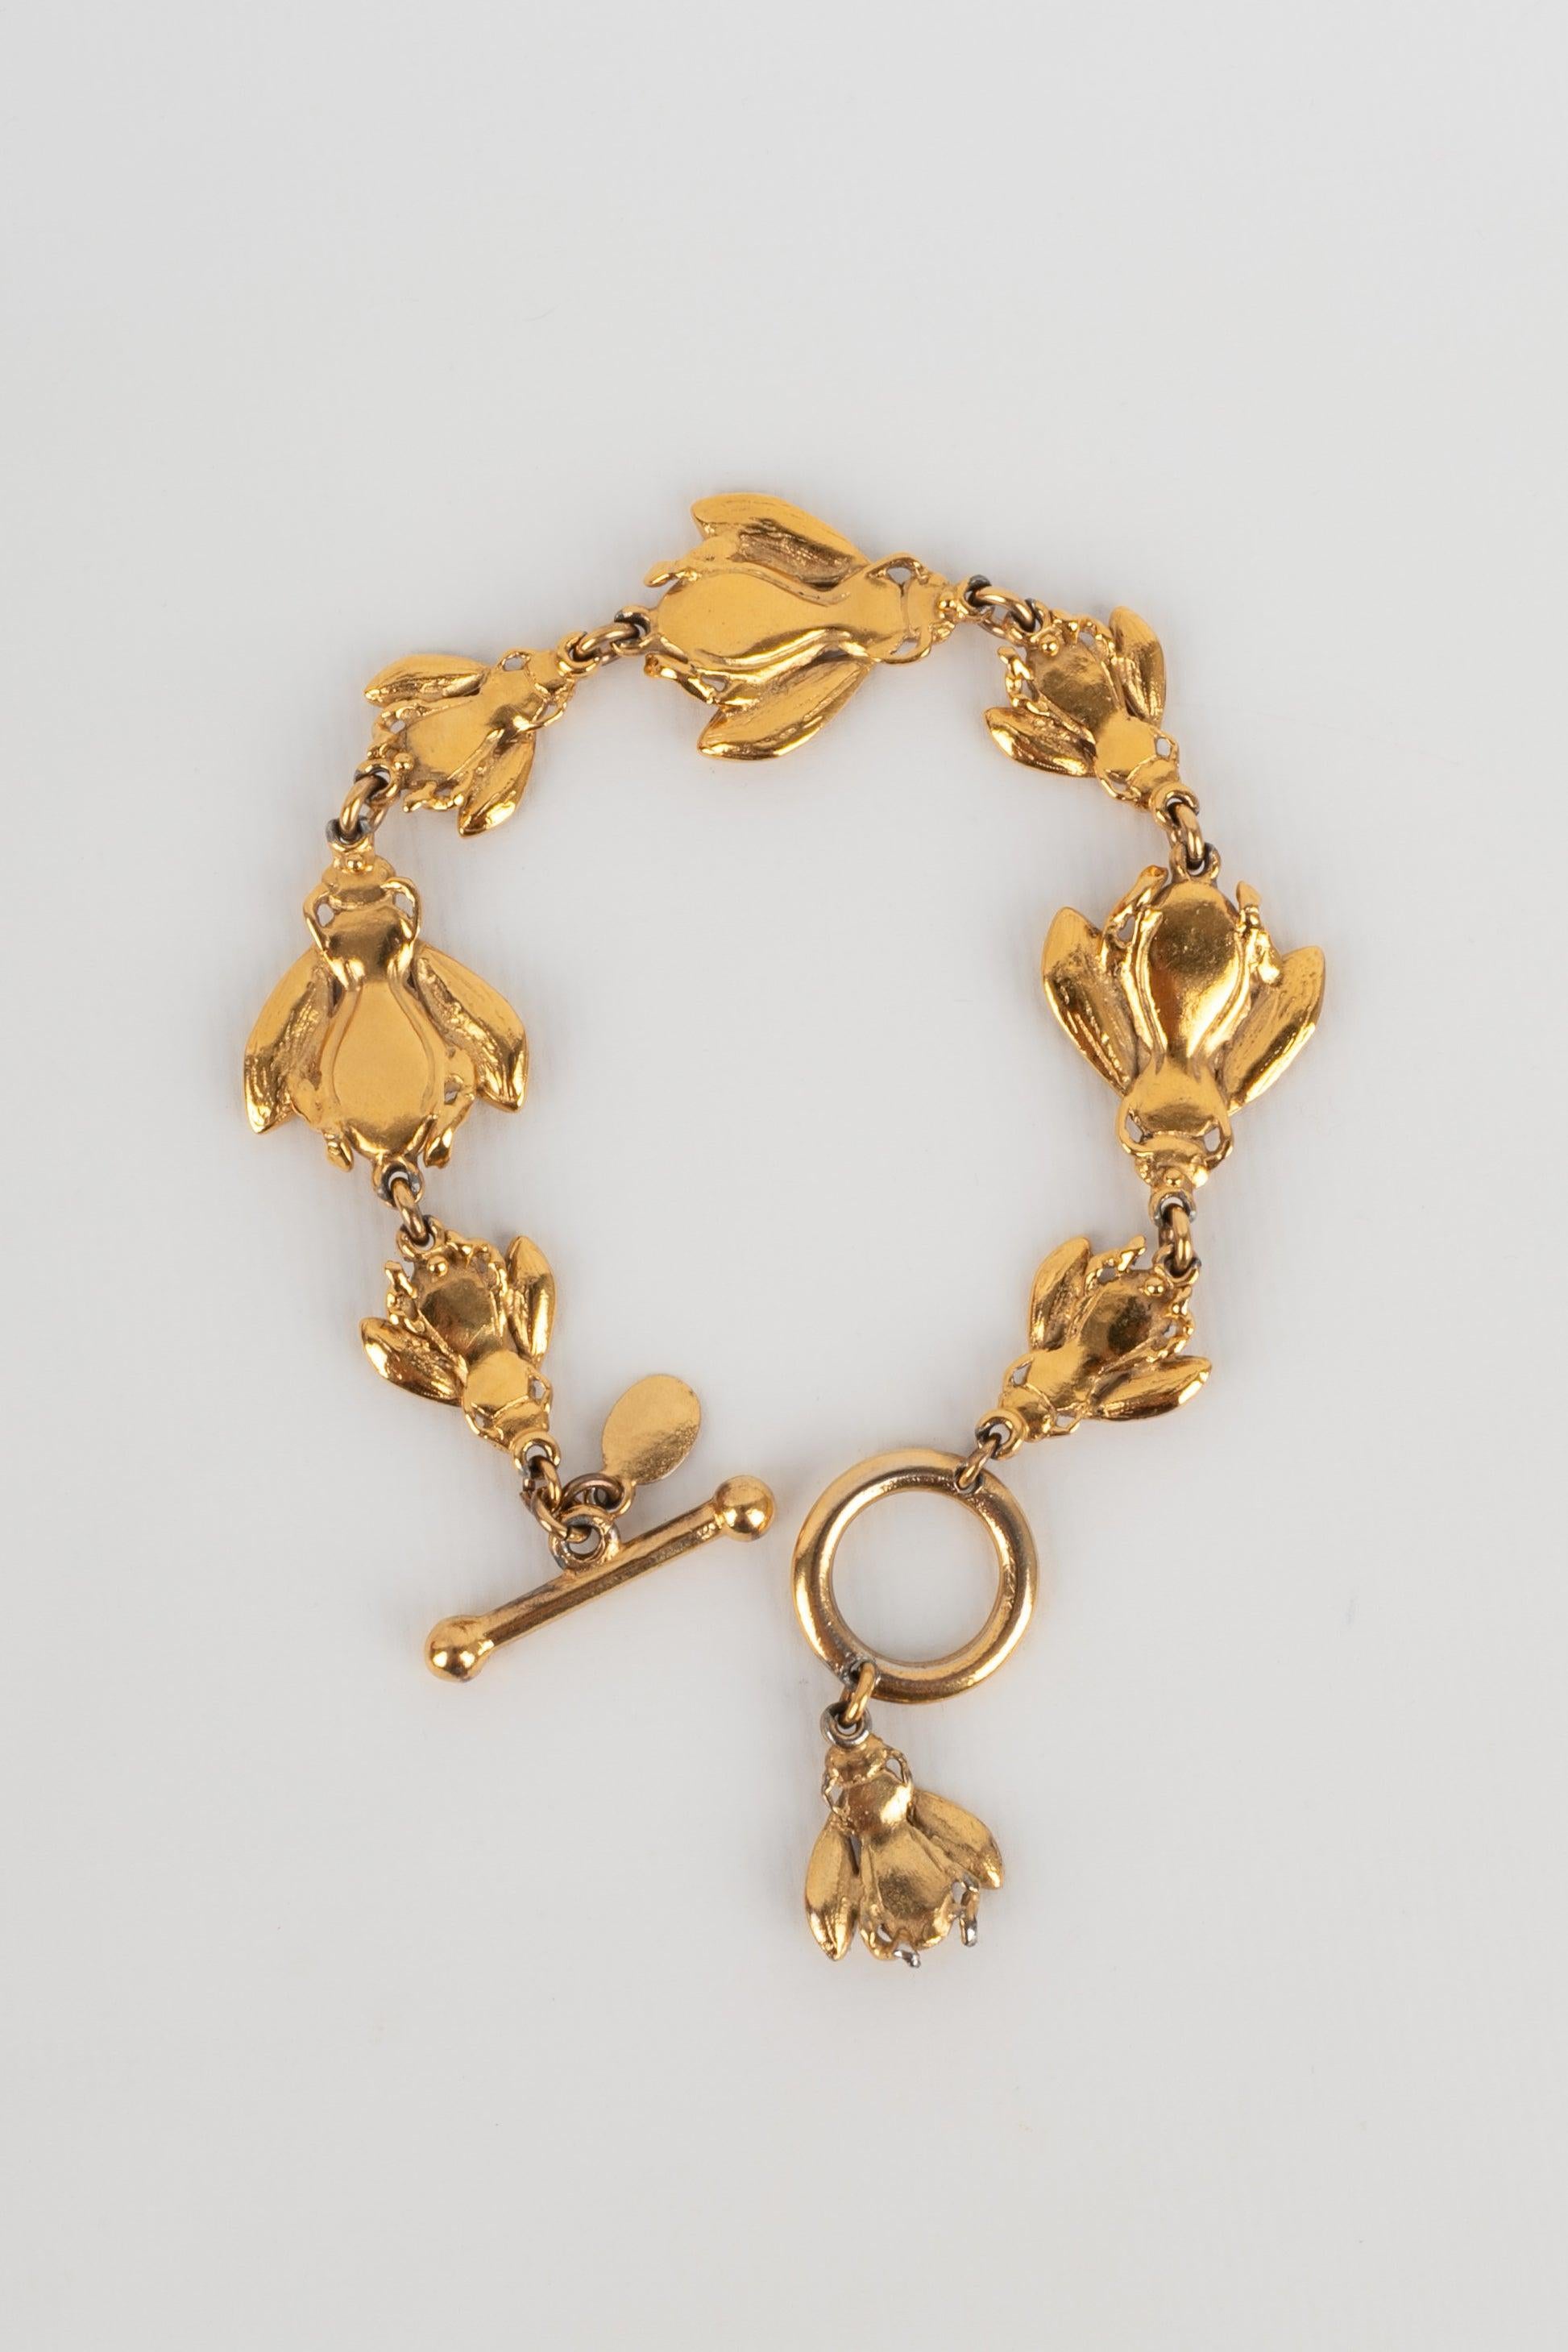 Dior - Golden metal bracelet representing bees.

Additional information:
Condition: Very good condition
Dimensions: Length: 20 cm

Seller Reference: BRA186